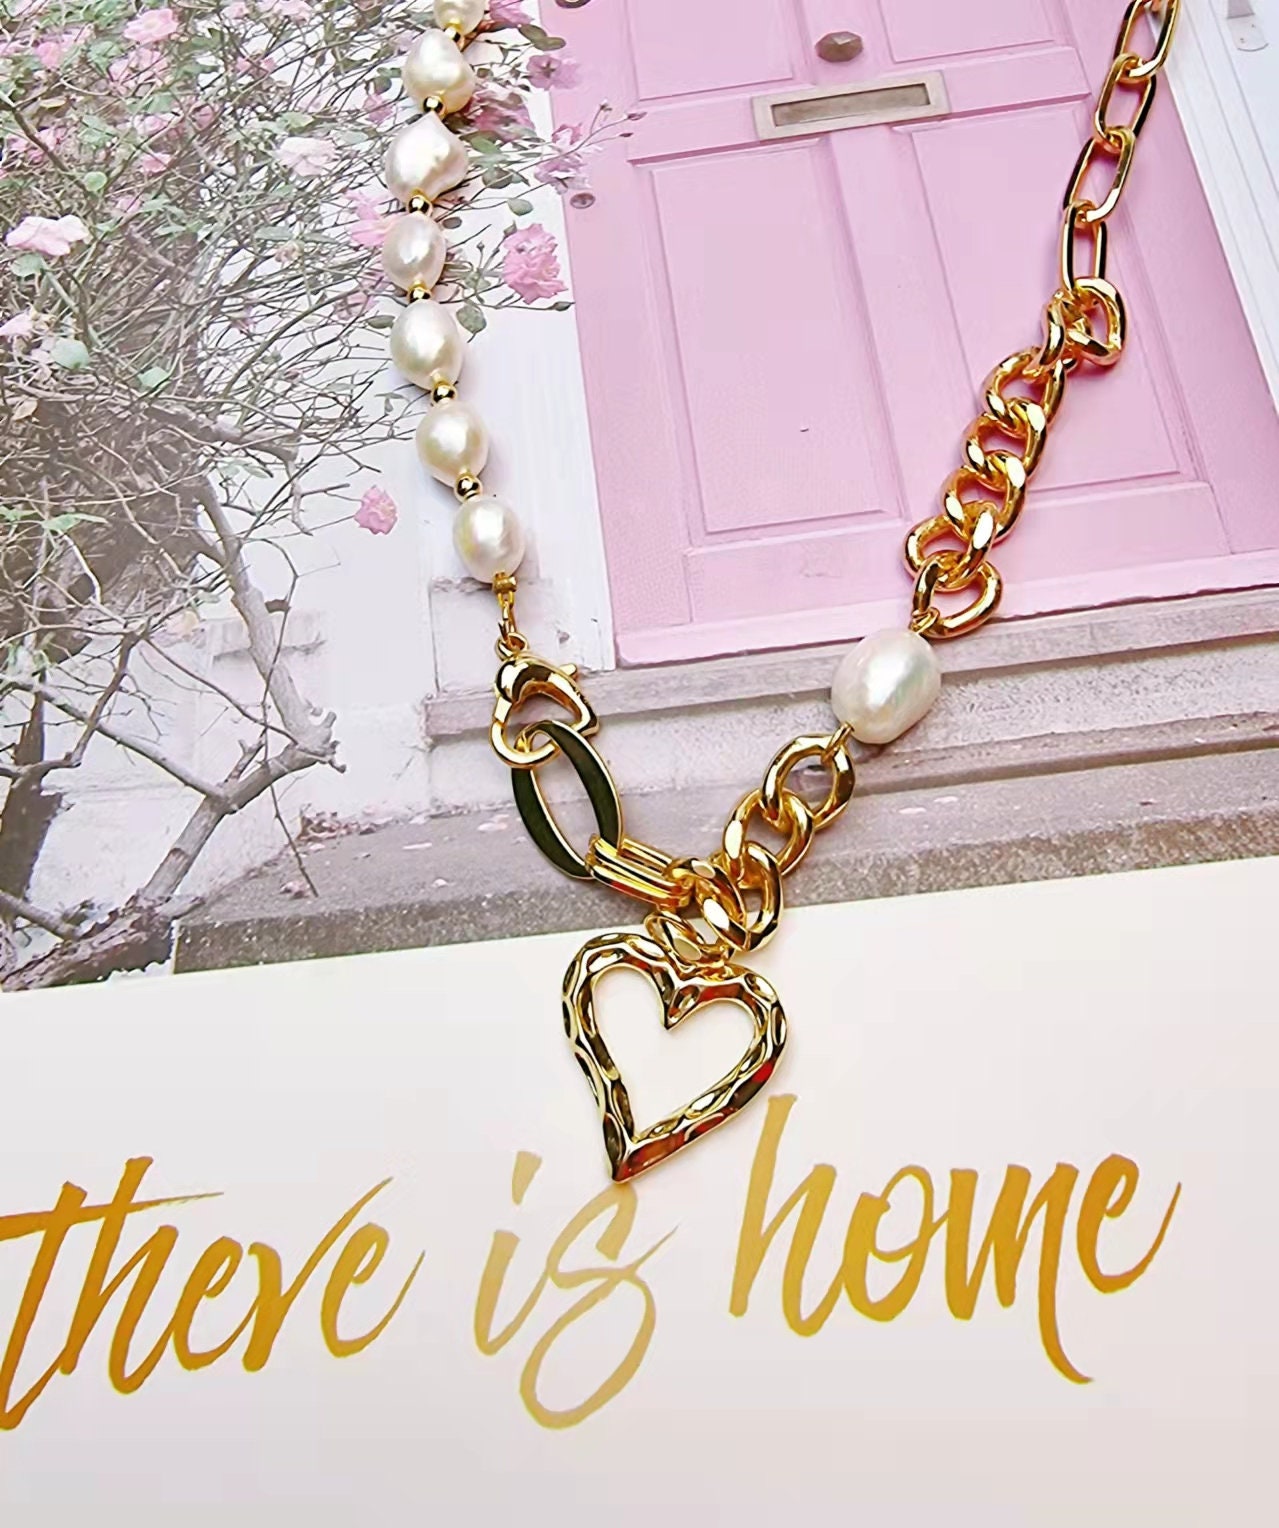 Jewelry - Heart and Home Gifts and Accessories